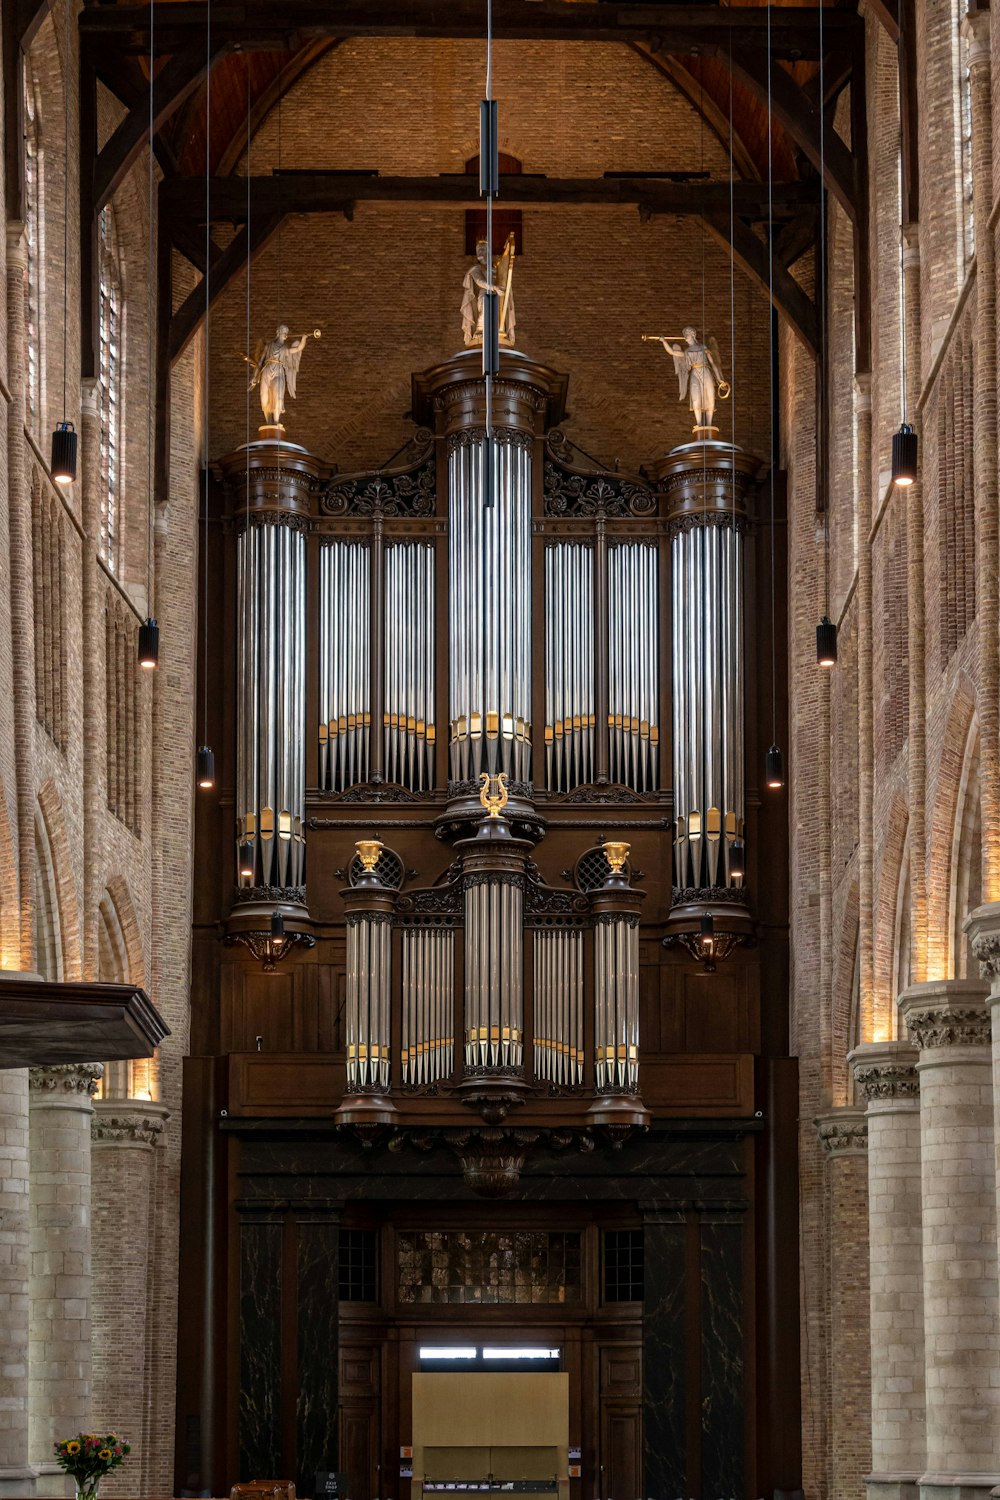 a large organ in a building